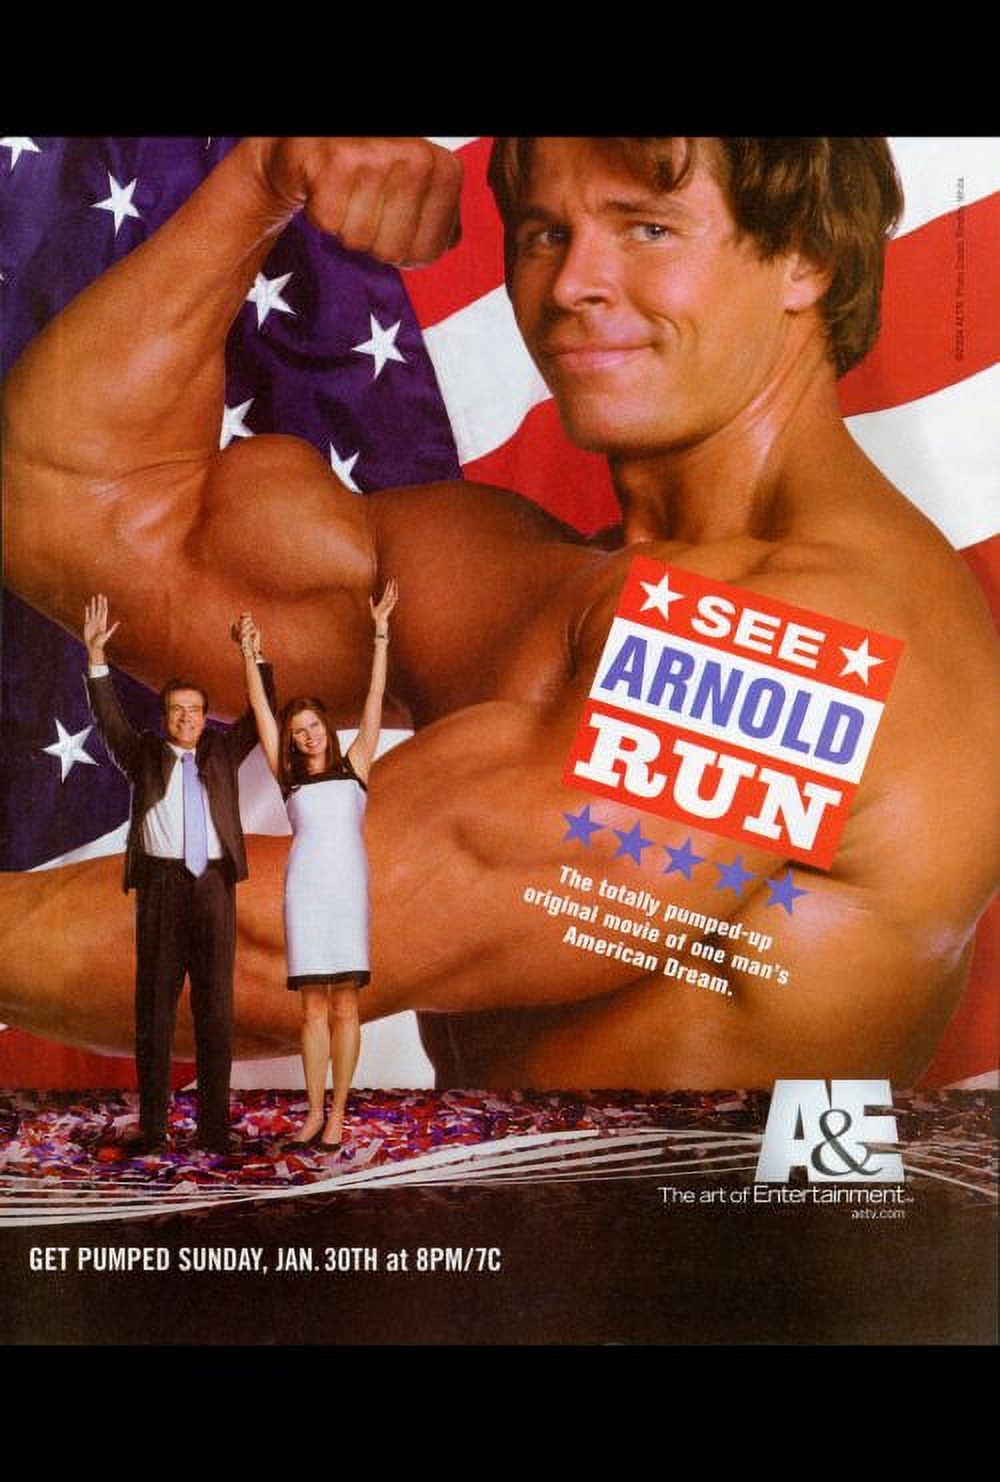 See Arnold Run - movie POSTER (Style A) (27" x 40") (2005) - image 1 of 2